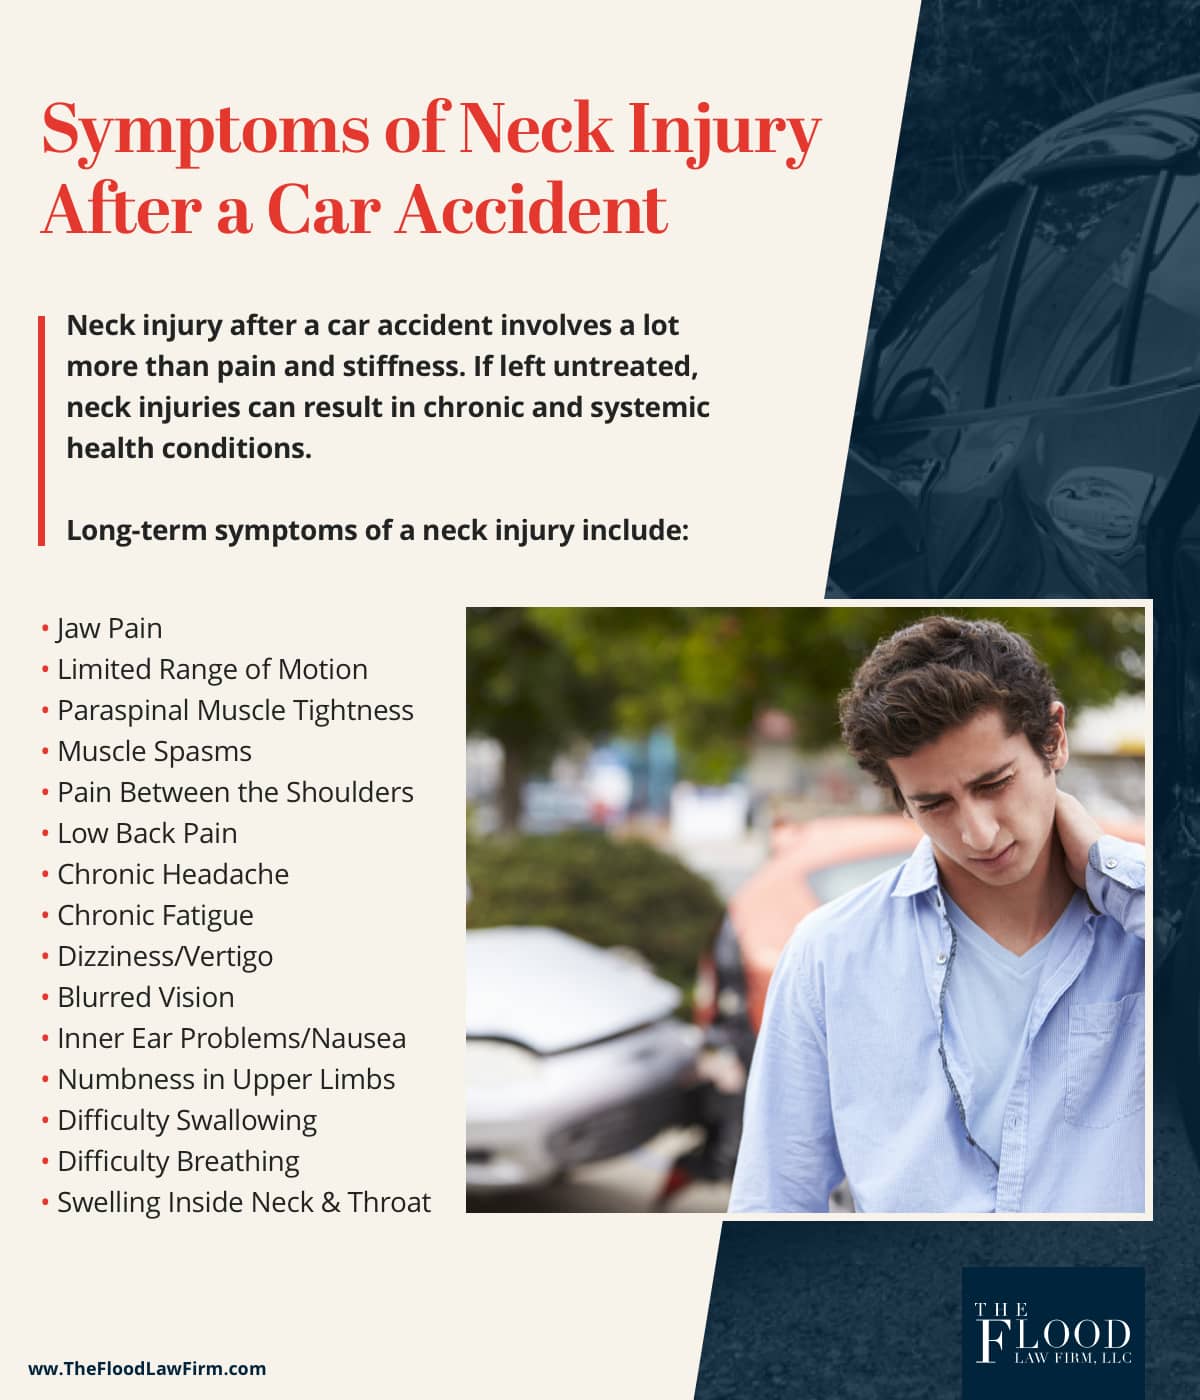 Neck Injuries from Car Accident - Call A Car Accident Lawyer Today